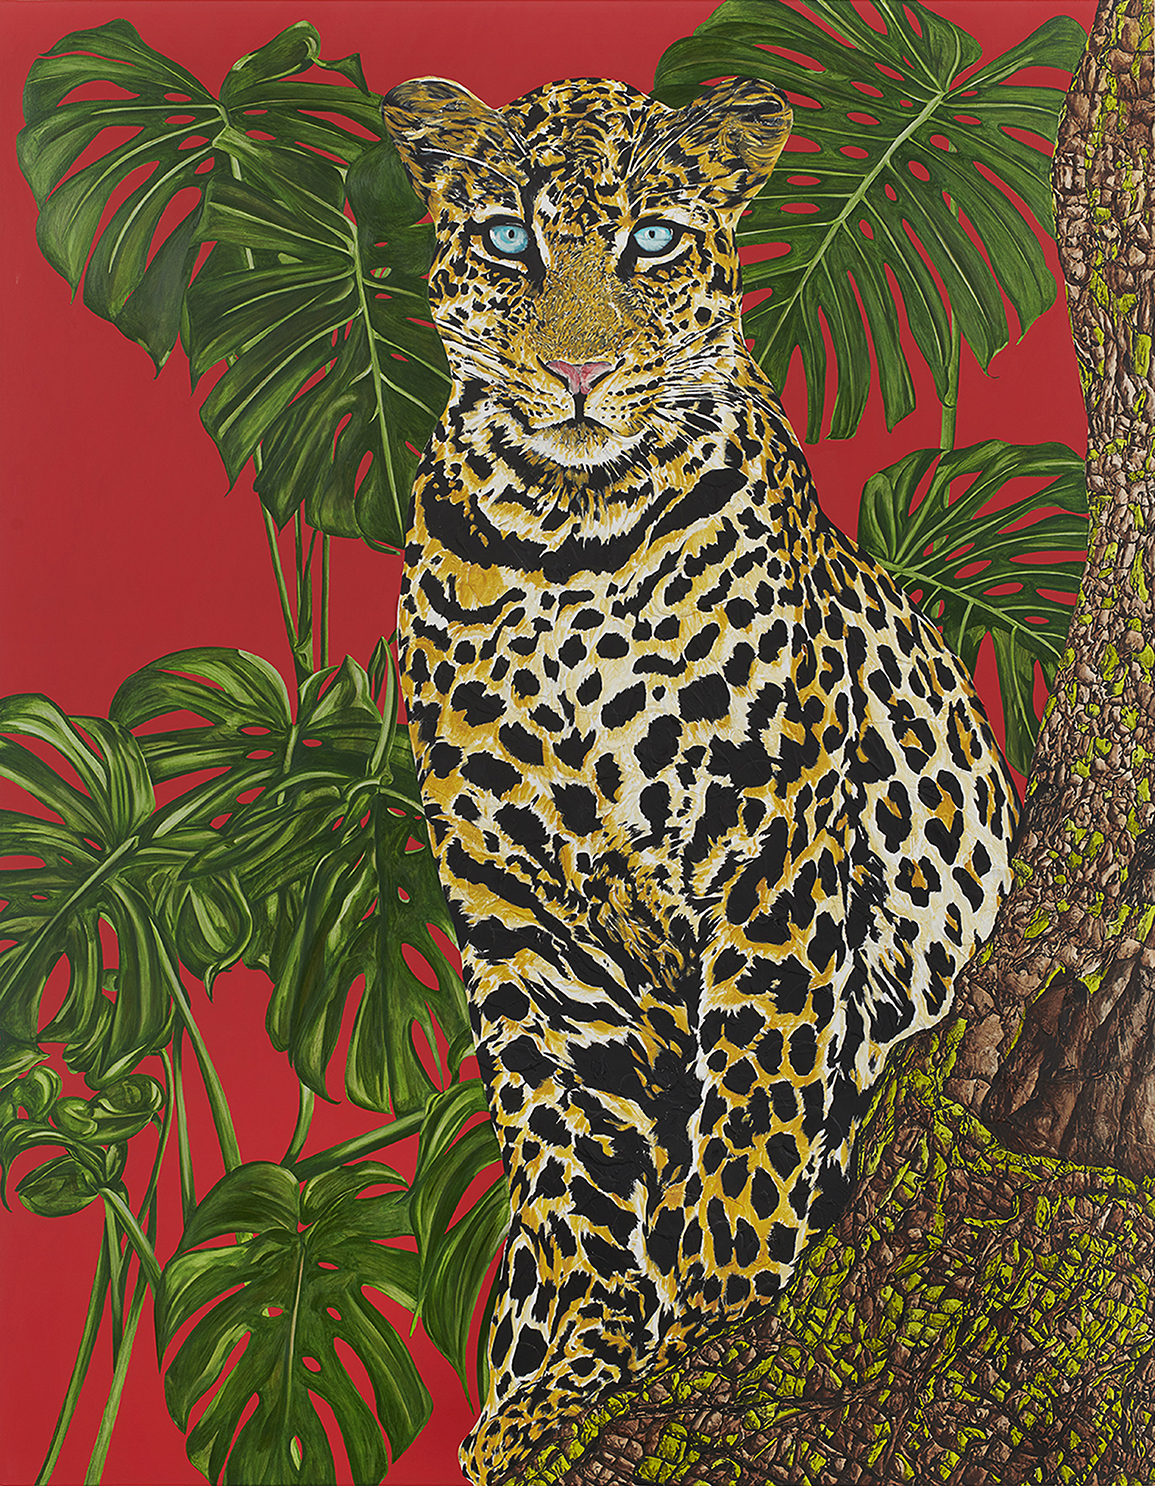 Oil painting of a jaguar perched on a tree limb against a red background with palm leaves.